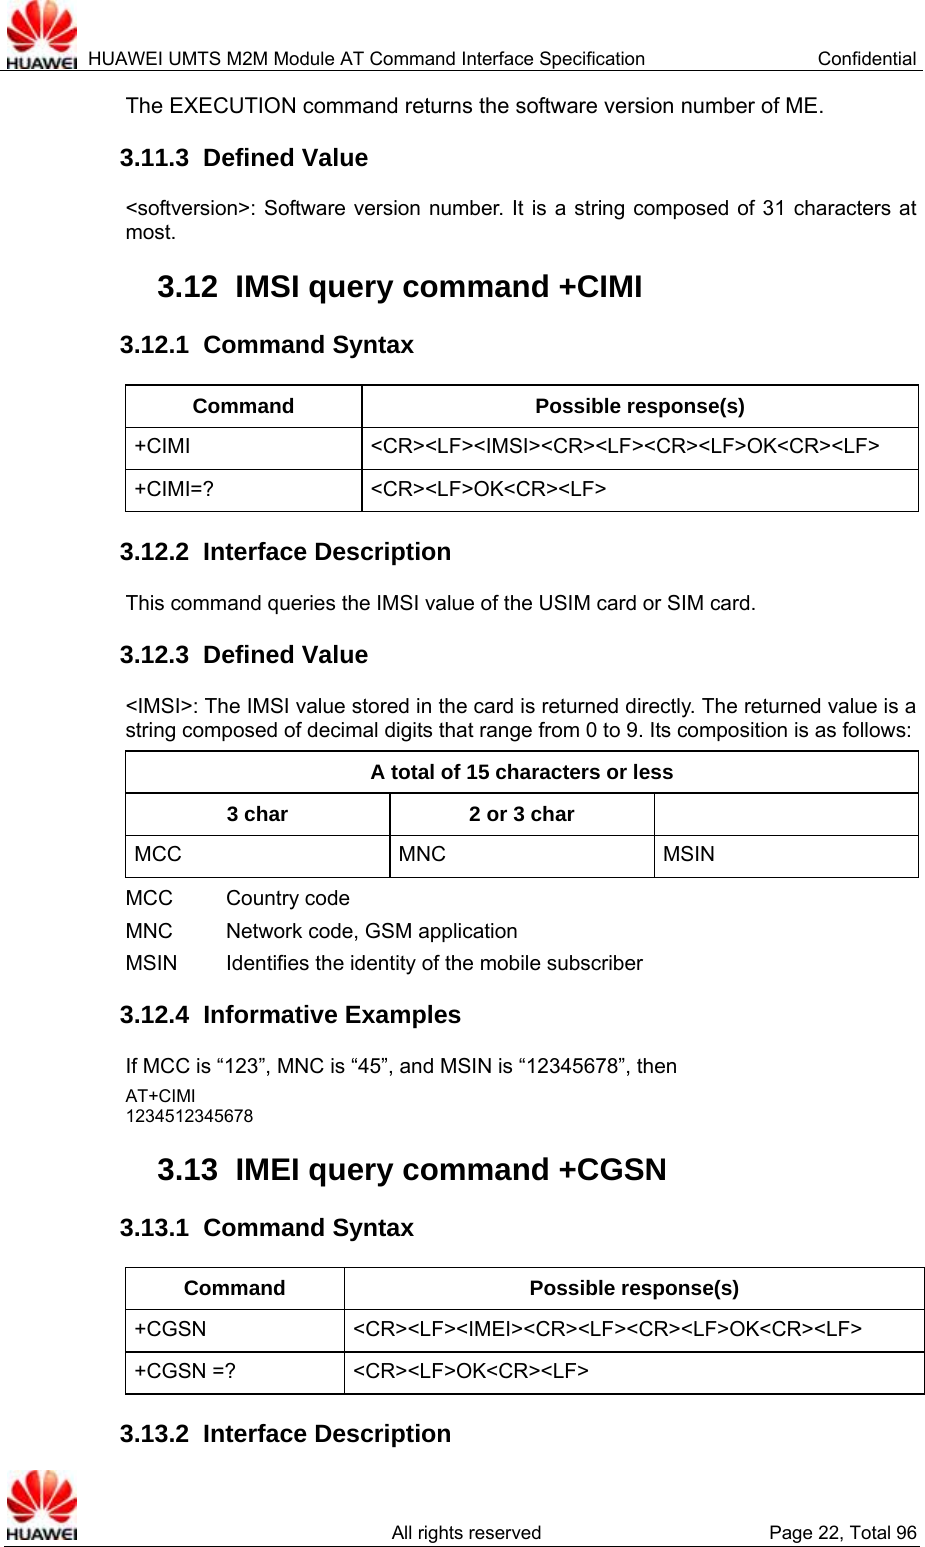  HUAWEI UMTS M2M Module AT Command Interface Specification  Confidential   All rights reserved  Page 22, Total 96 The EXECUTION command returns the software version number of ME.   3.11.3  Defined Value &lt;softversion&gt;: Software version number. It is a string composed of 31 characters at most.  3.12  IMSI query command +CIMI 3.12.1  Command Syntax Command Possible response(s) +CIMI &lt;CR&gt;&lt;LF&gt;&lt;IMSI&gt;&lt;CR&gt;&lt;LF&gt;&lt;CR&gt;&lt;LF&gt;OK&lt;CR&gt;&lt;LF&gt; +CIMI=? &lt;CR&gt;&lt;LF&gt;OK&lt;CR&gt;&lt;LF&gt; 3.12.2  Interface Description This command queries the IMSI value of the USIM card or SIM card. 3.12.3  Defined Value &lt;IMSI&gt;: The IMSI value stored in the card is returned directly. The returned value is a string composed of decimal digits that range from 0 to 9. Its composition is as follows:   A total of 15 characters or less 3 char  2 or 3 char   MCC MNC MSIN MCC    Country code MNC      Network code, GSM application   MSIN    Identifies the identity of the mobile subscriber 3.12.4  Informative Examples If MCC is “123”, MNC is “45”, and MSIN is “12345678”, then   AT+CIMI 1234512345678 3.13  IMEI query command +CGSN 3.13.1  Command Syntax Command Possible response(s) +CGSN &lt;CR&gt;&lt;LF&gt;&lt;IMEI&gt;&lt;CR&gt;&lt;LF&gt;&lt;CR&gt;&lt;LF&gt;OK&lt;CR&gt;&lt;LF&gt; +CGSN =?  &lt;CR&gt;&lt;LF&gt;OK&lt;CR&gt;&lt;LF&gt; 3.13.2  Interface Description 